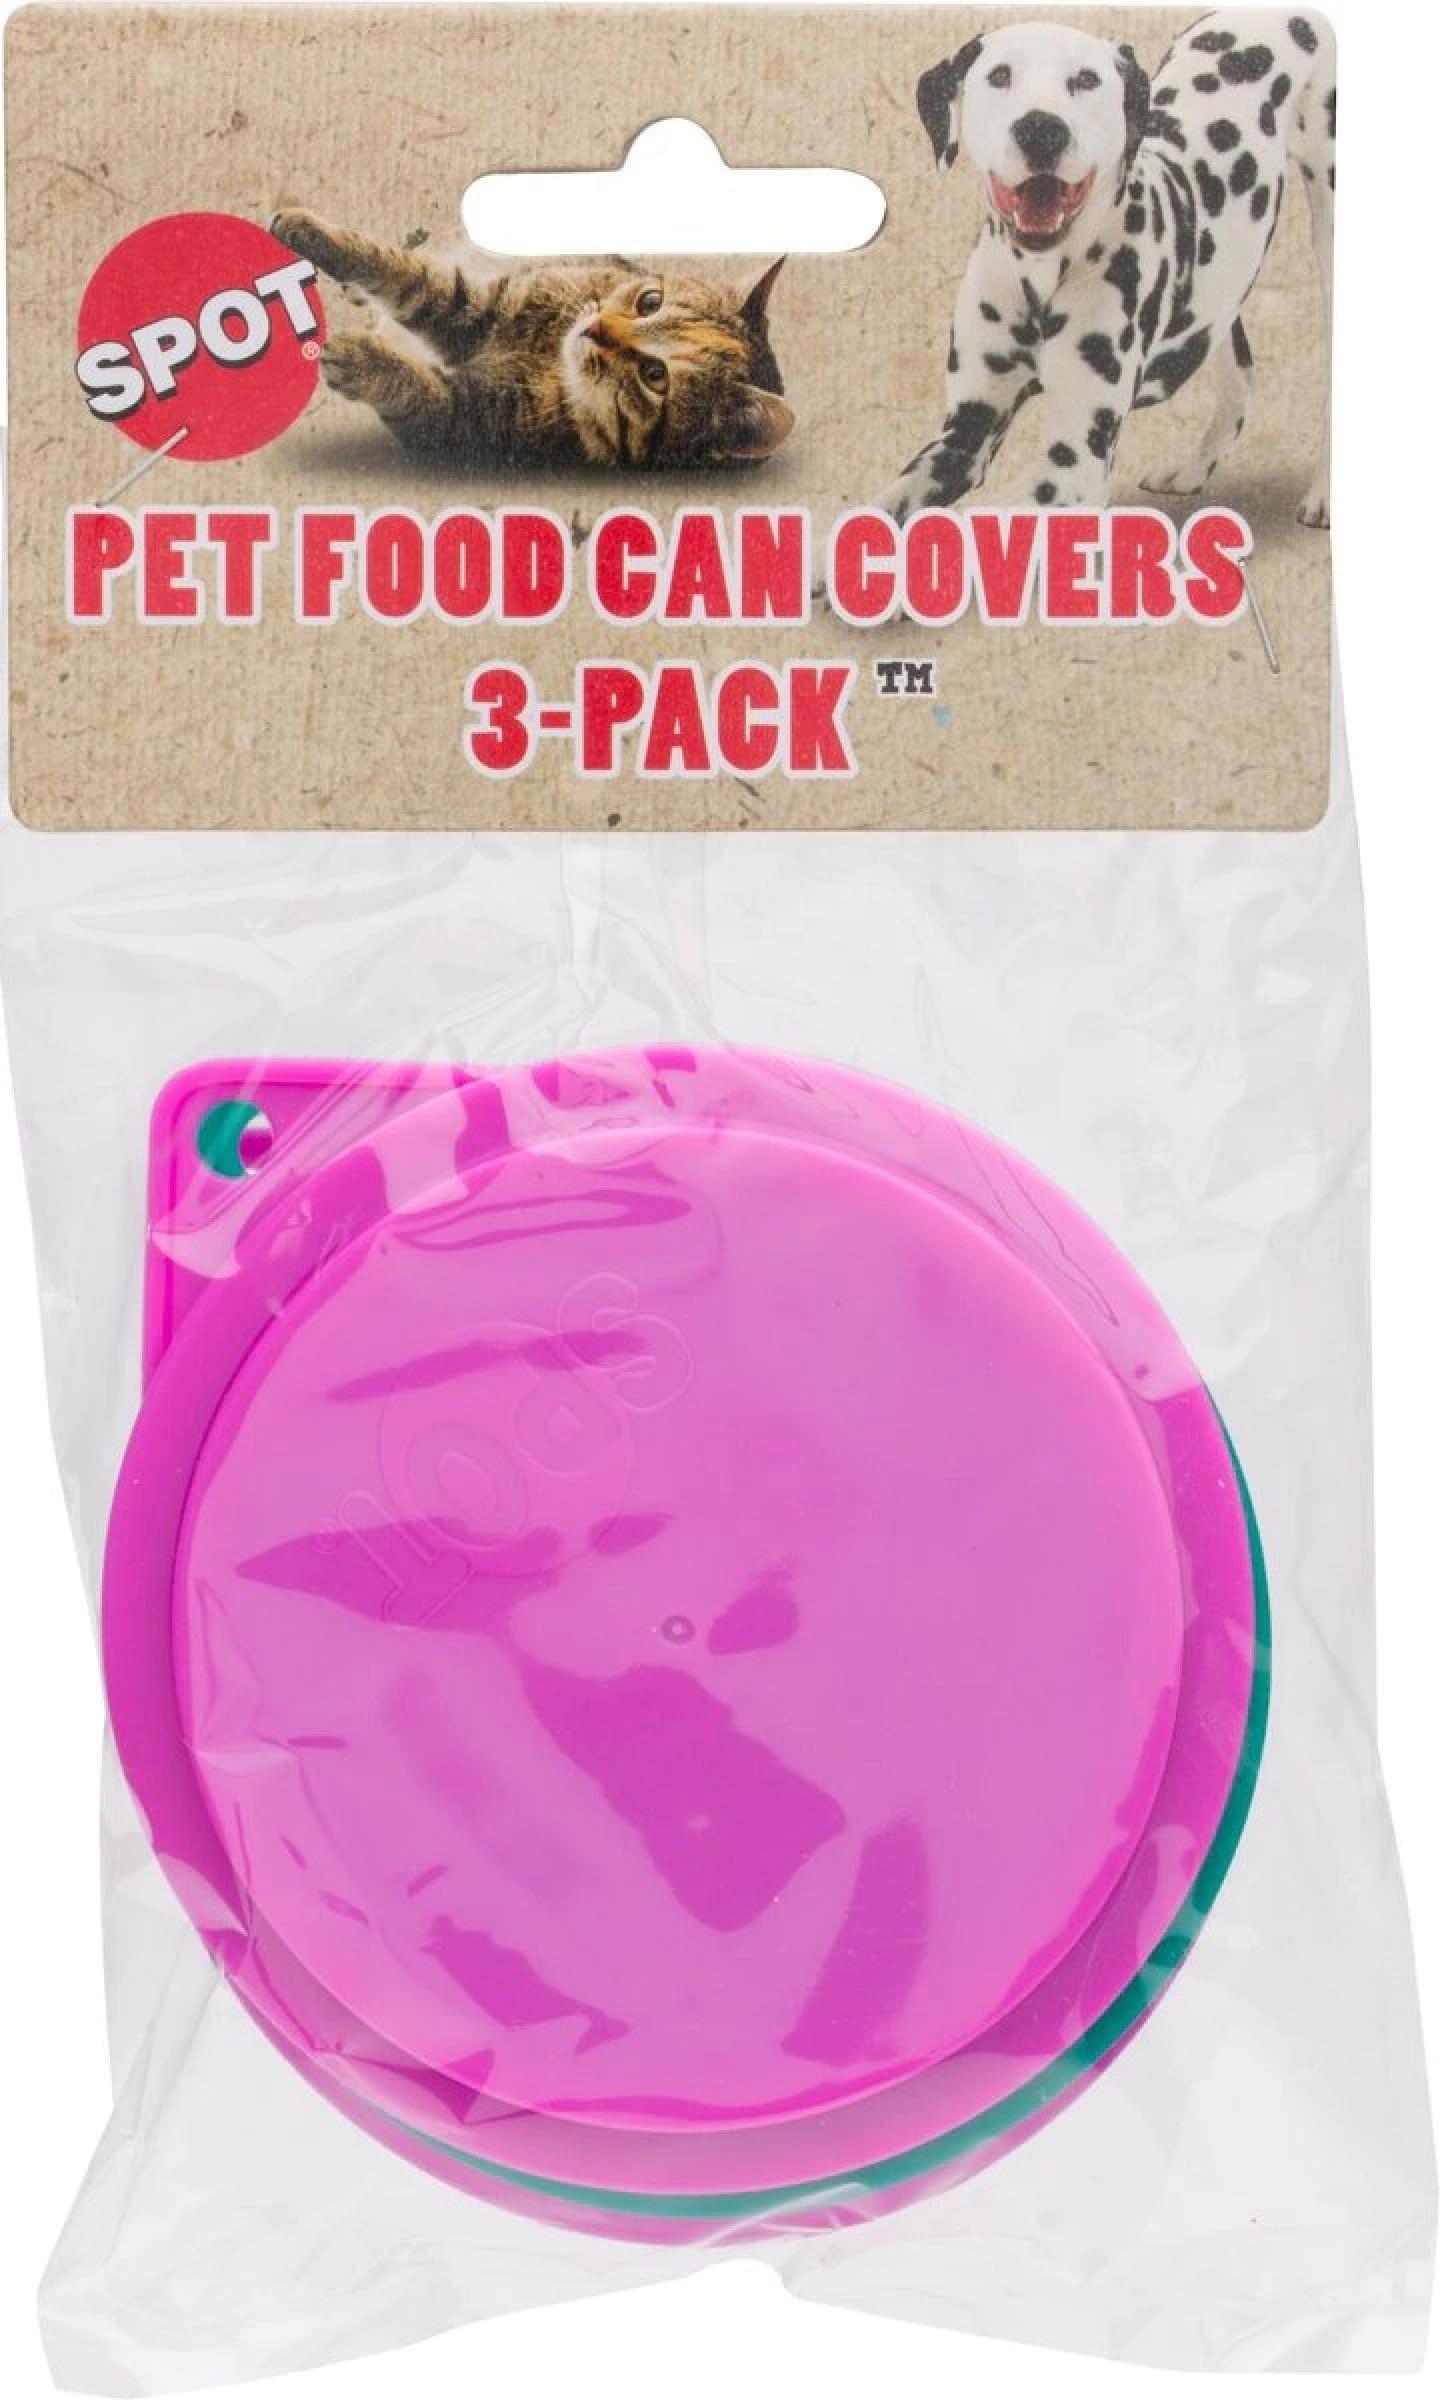 Pet Food Can Covers